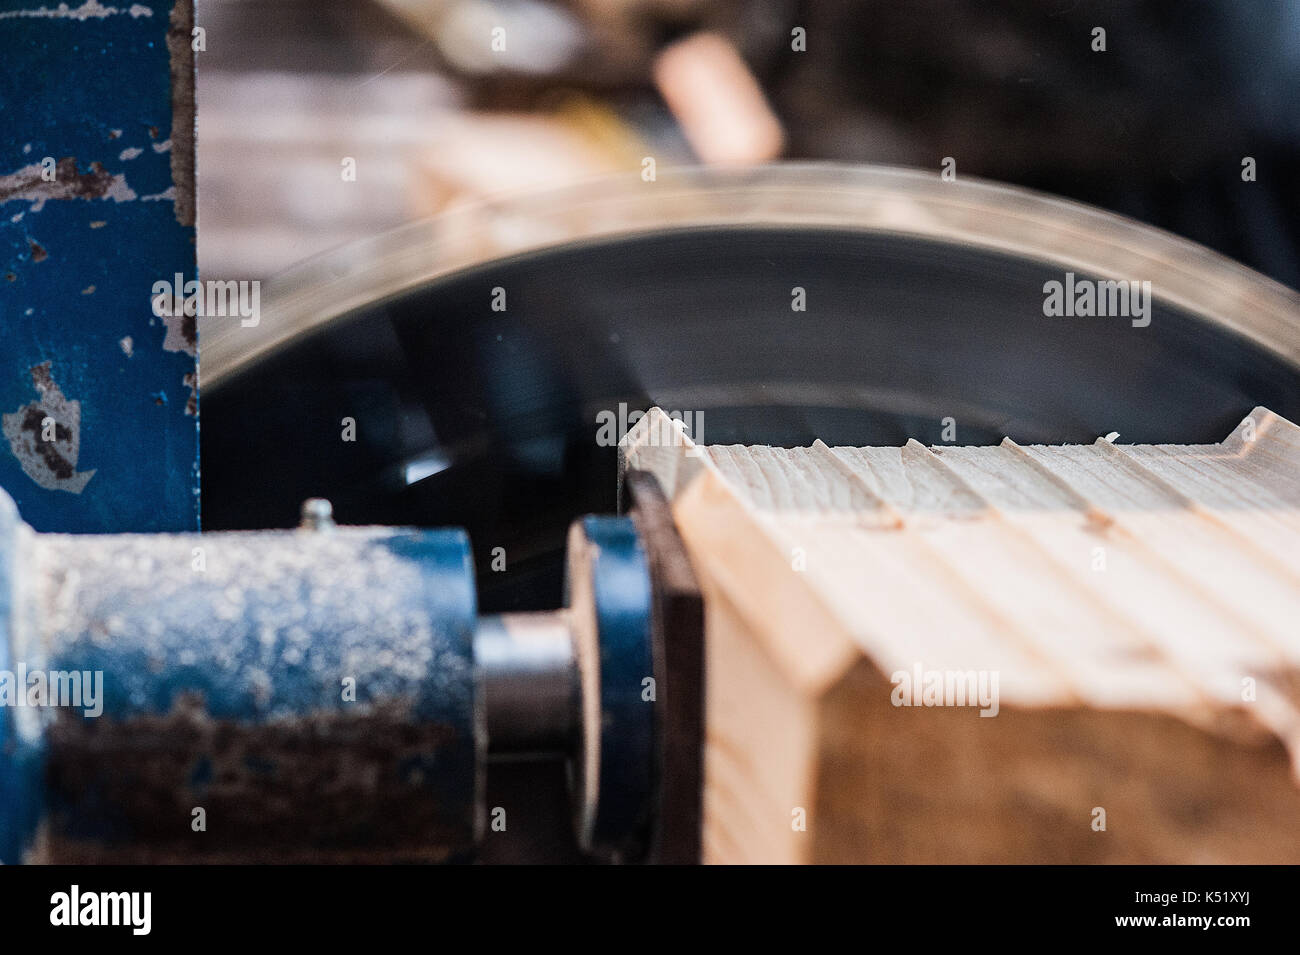 Circular saw with a wooden beam and measuring scale. Sawing a wooden beam with a circular saw. close up at exit Stock Photo